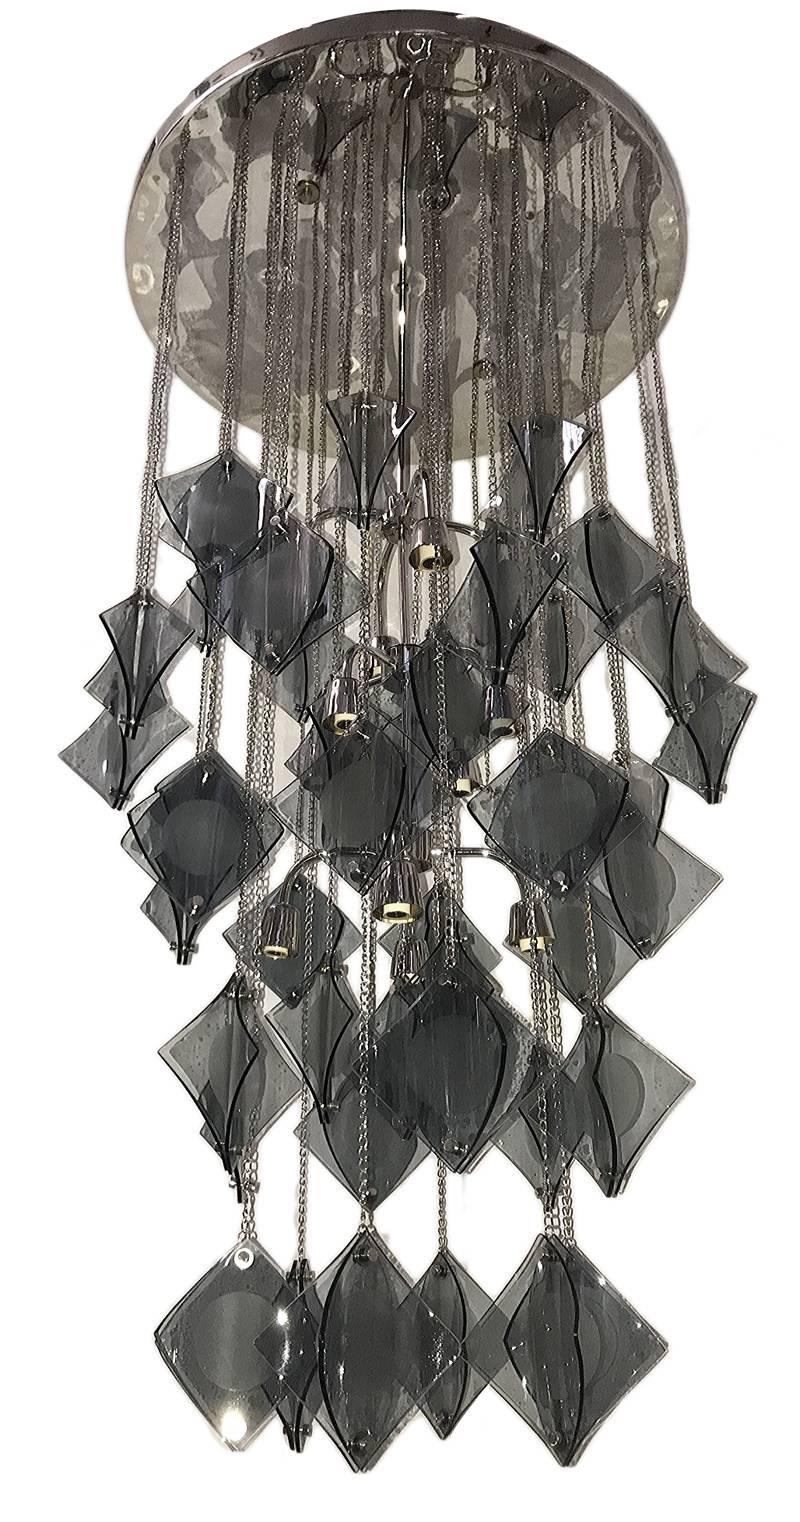 A large Italian molded glass light fixture with 12 candelabra lights, circa 1960s.

Measurements:
Height 51.5